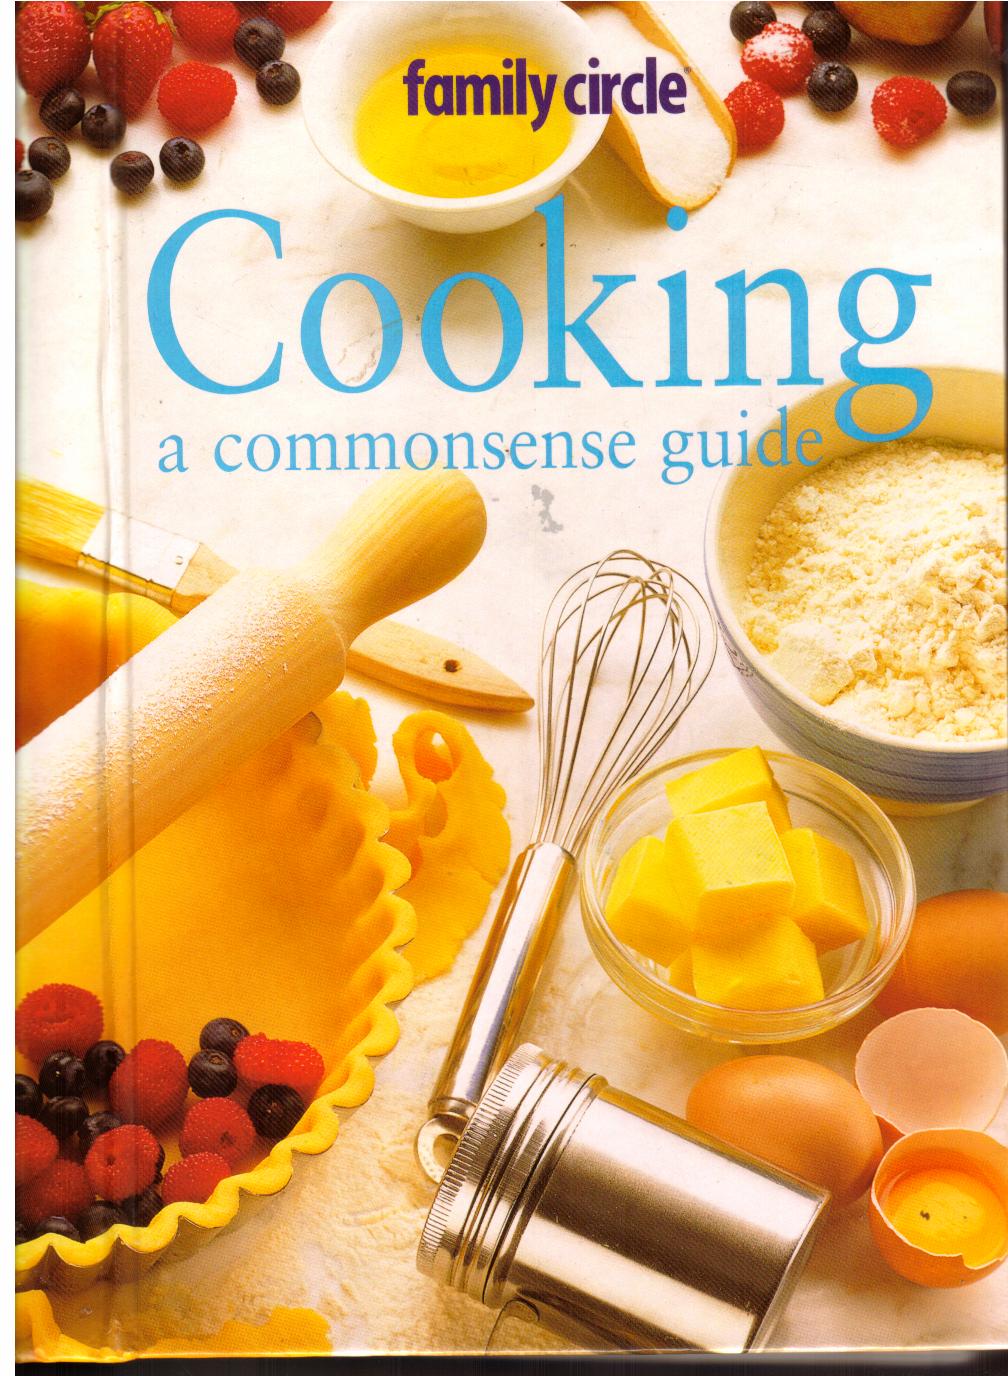 Pdf cook. Pdf готовка. Cooking pdf. Cooking book. Cook book Series.